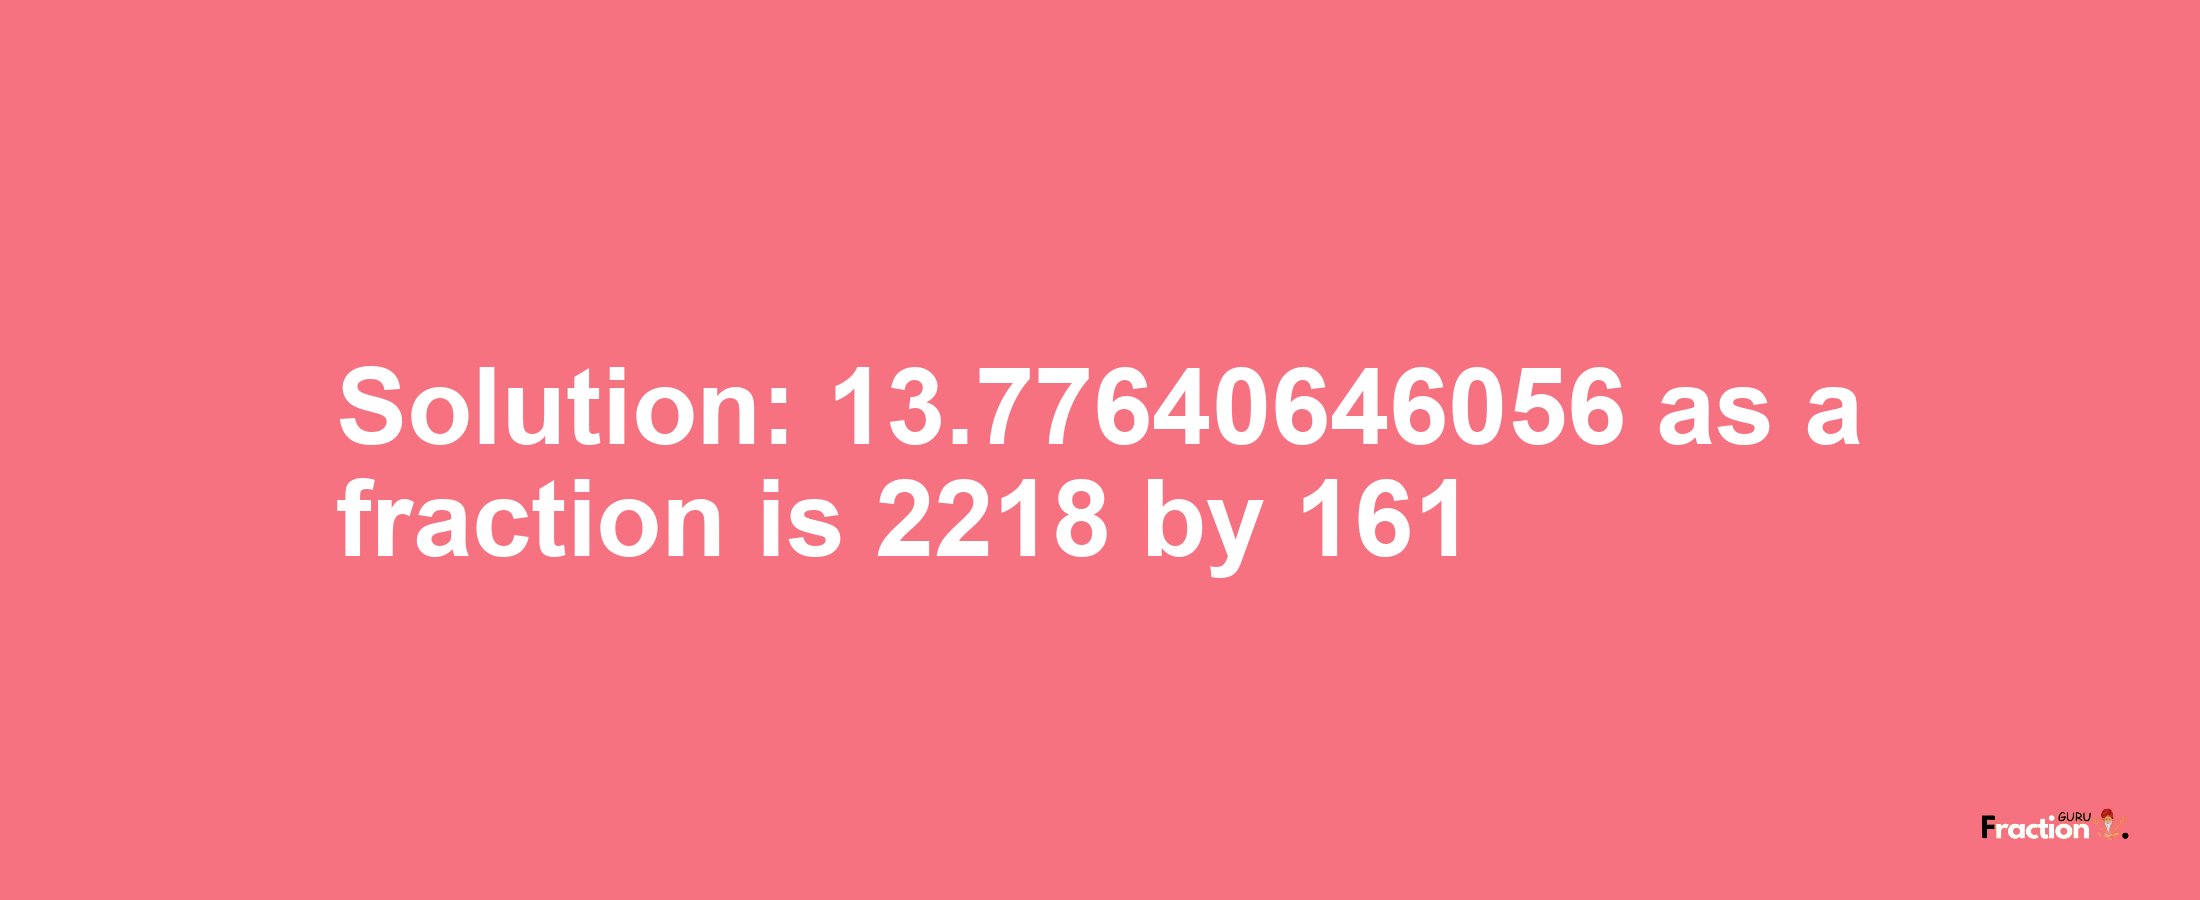 Solution:13.77640646056 as a fraction is 2218/161